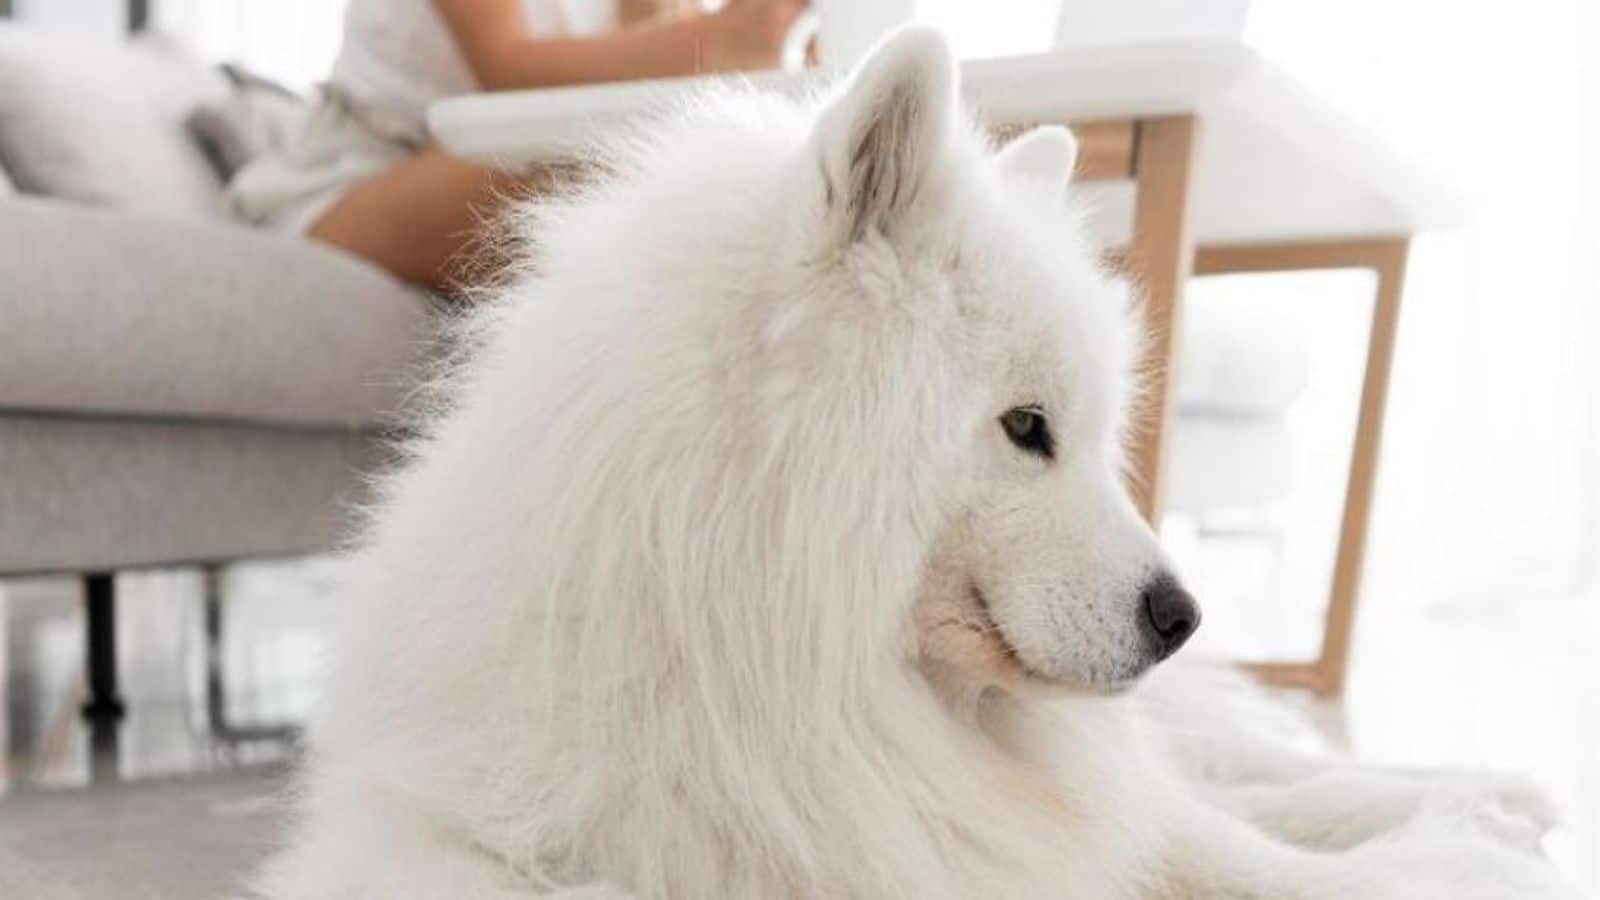 Here's how you can groom your Samoyed dog